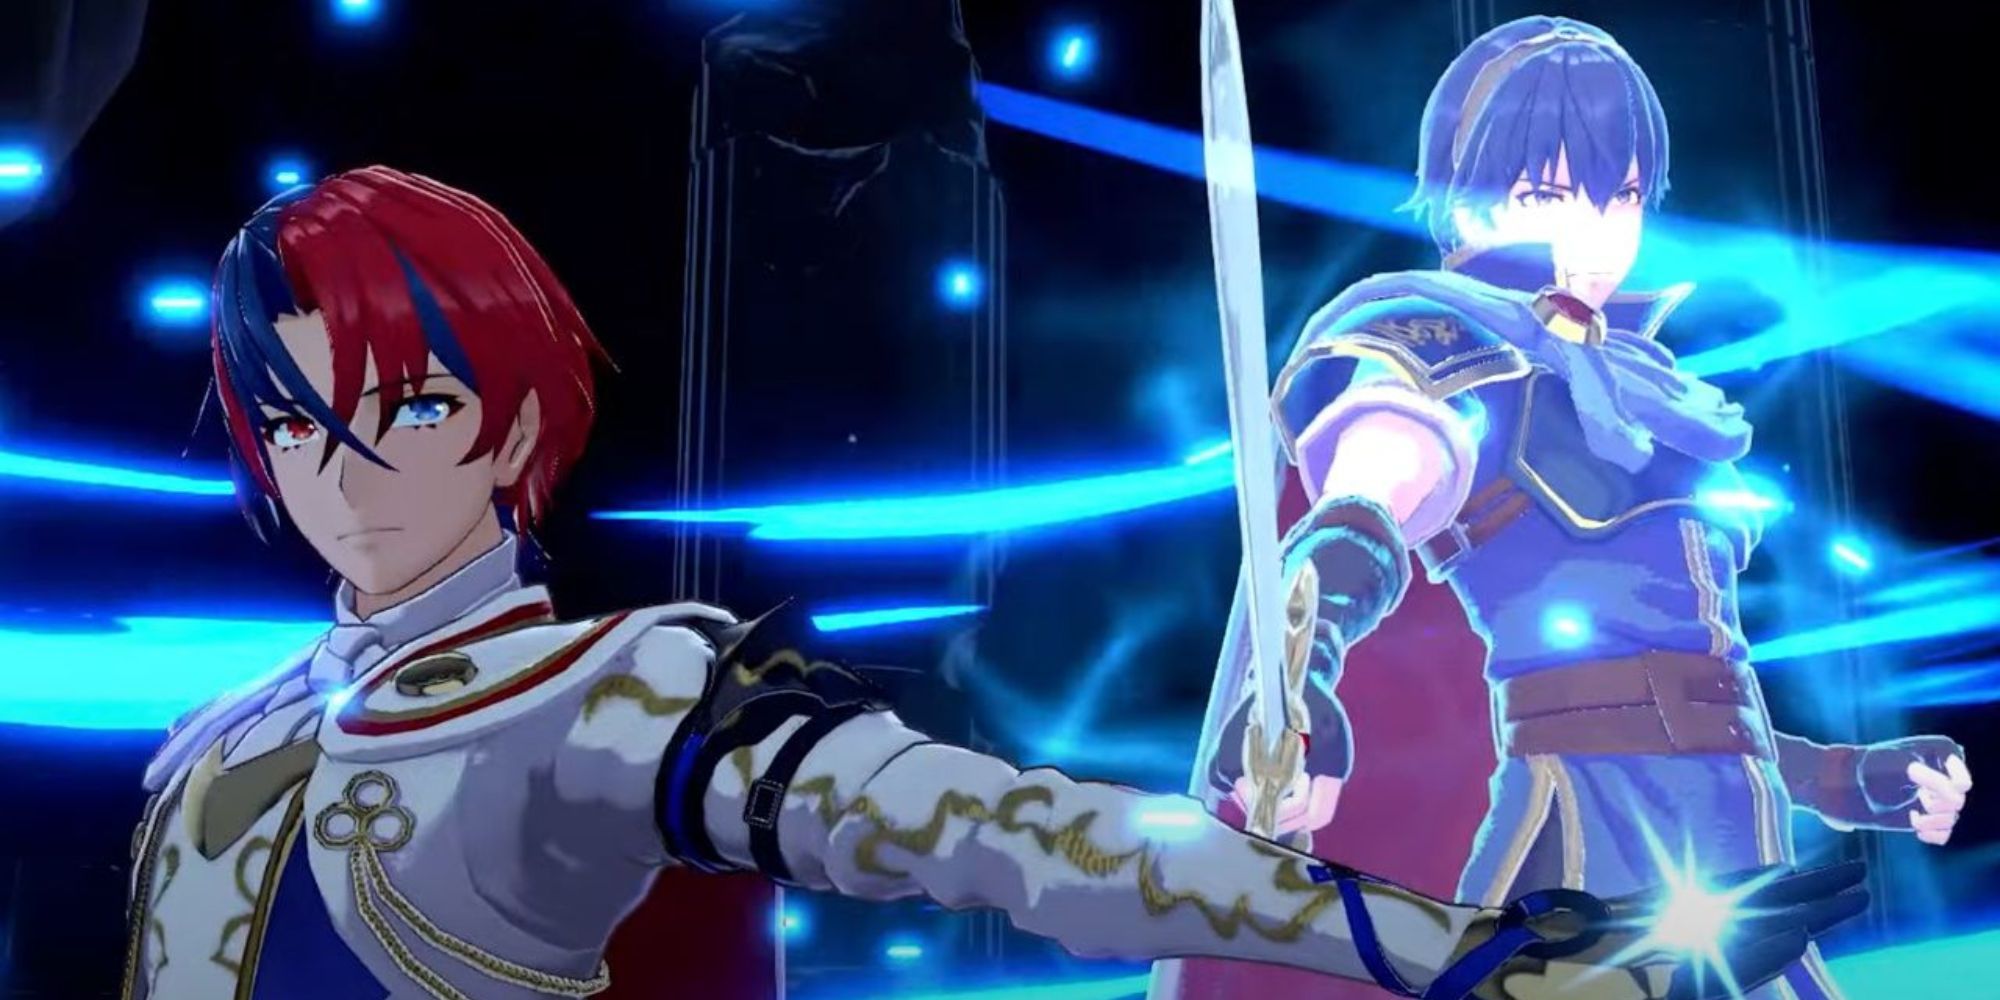 Fire Emblem Engage: Alear Using The Engage Ability with Marth